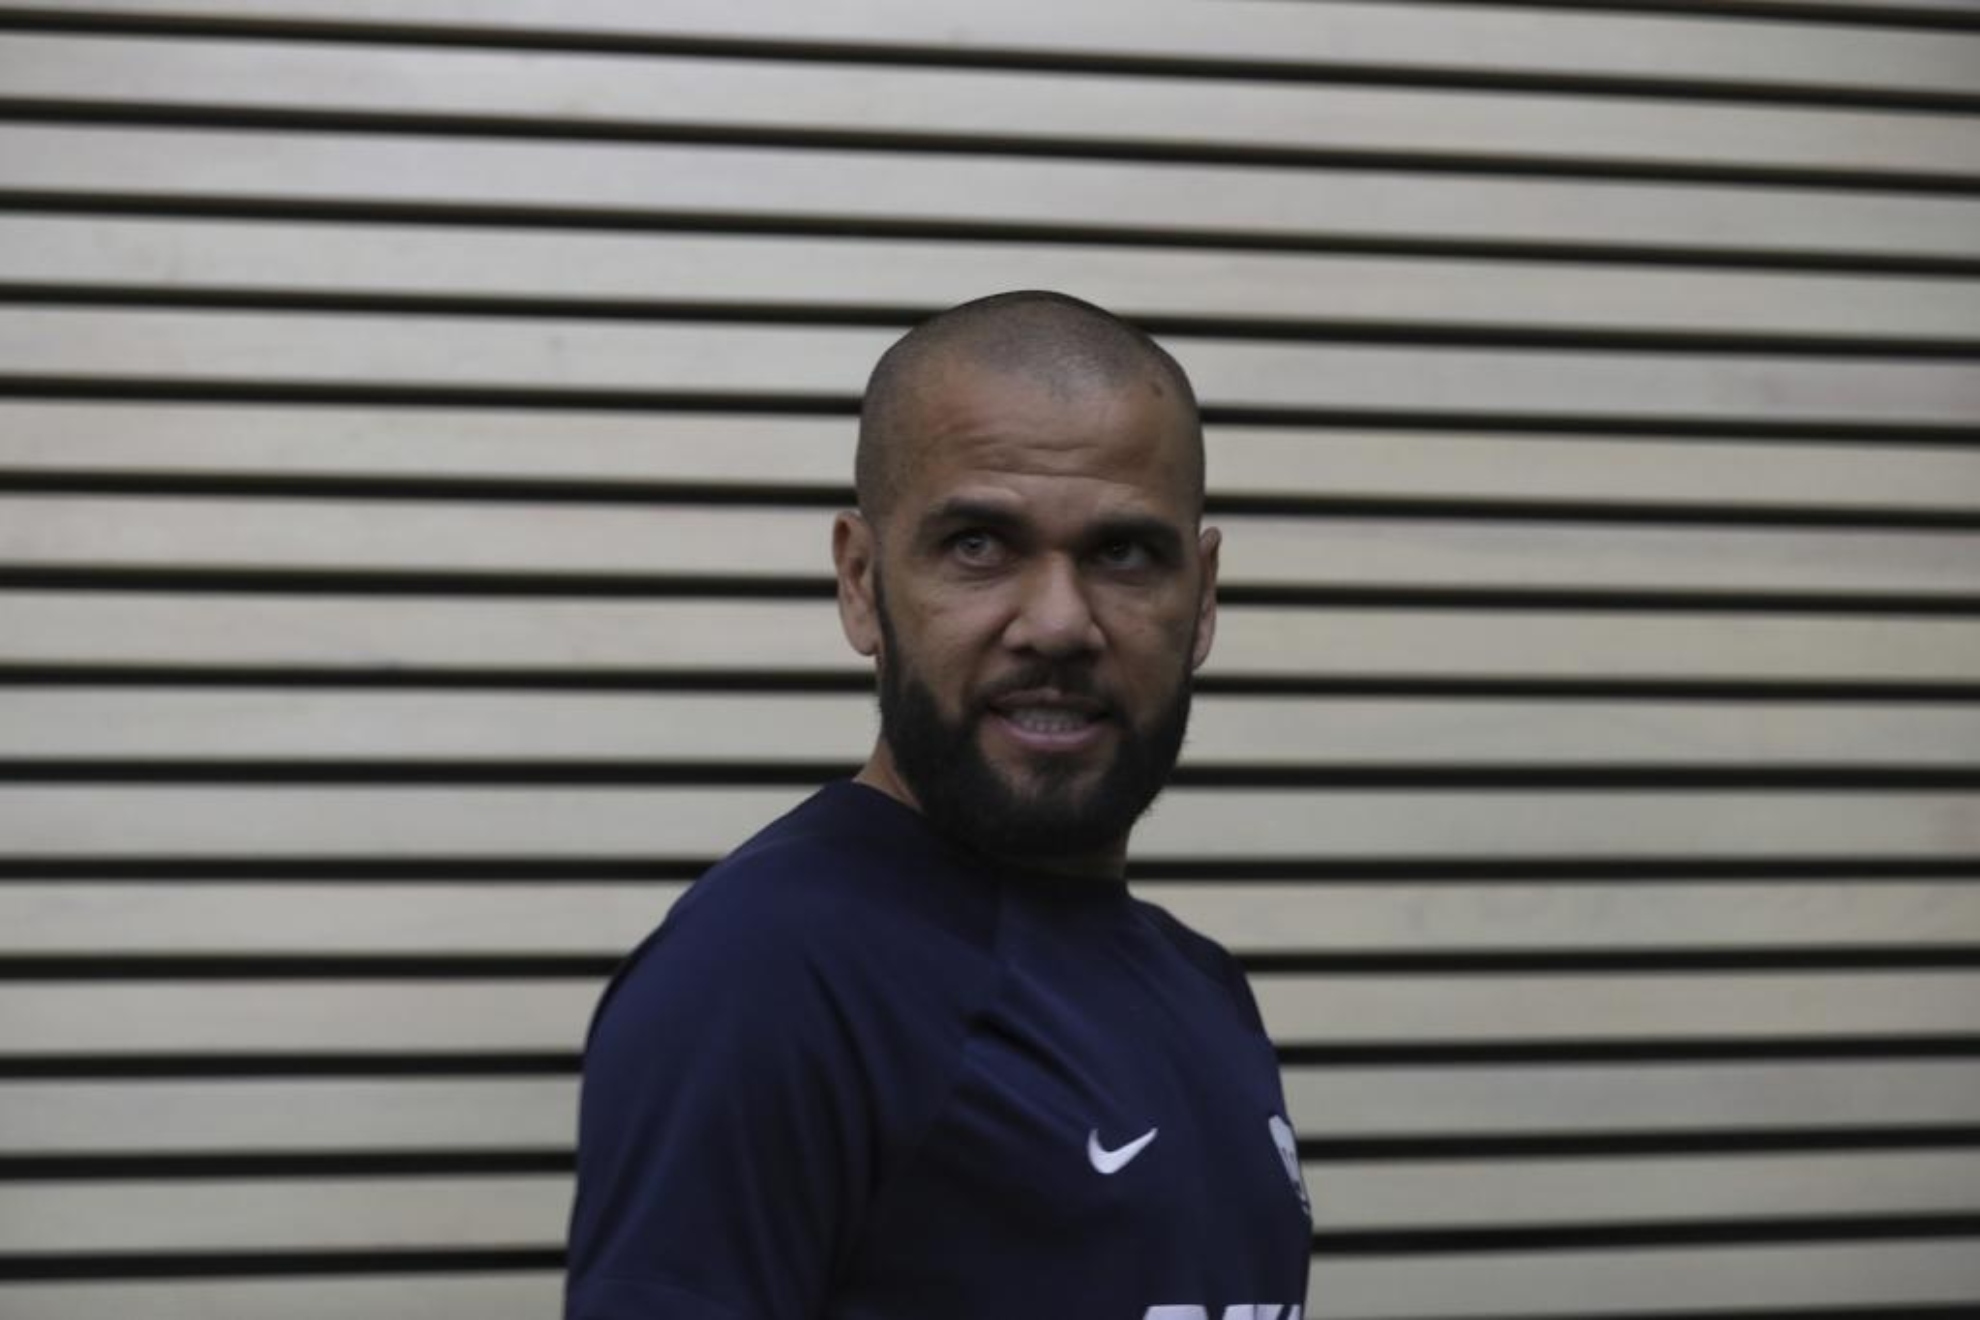 The police report of the Dani Alves case has come to light